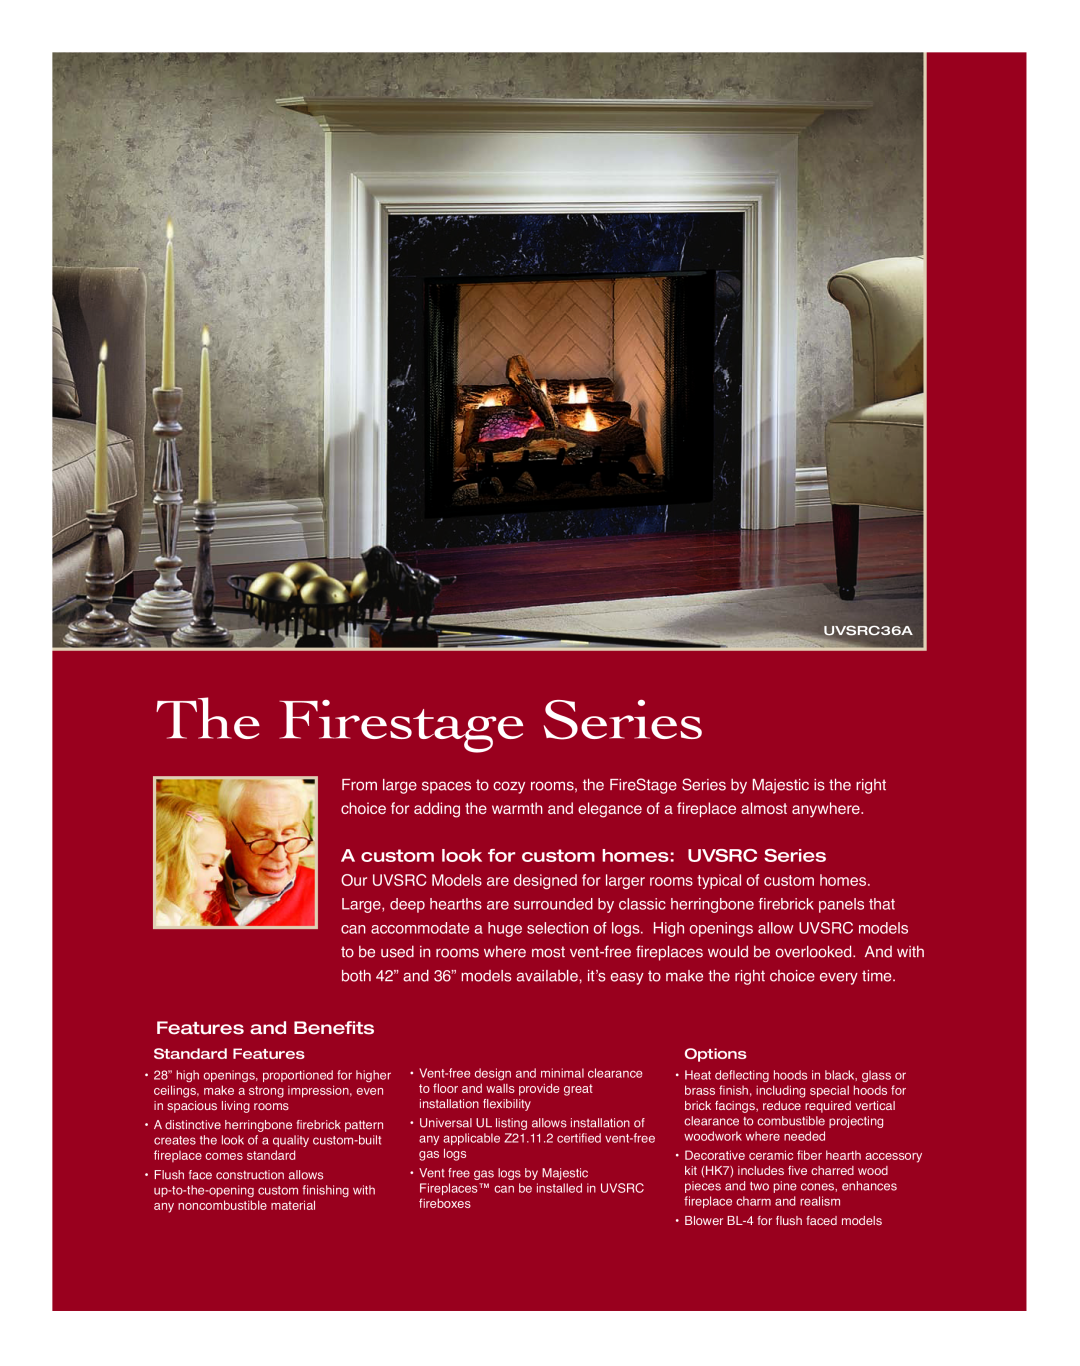 Majestic Appliances FireStage Series manual A custom look for custom homes UVSRC Series, The Firestage Series 